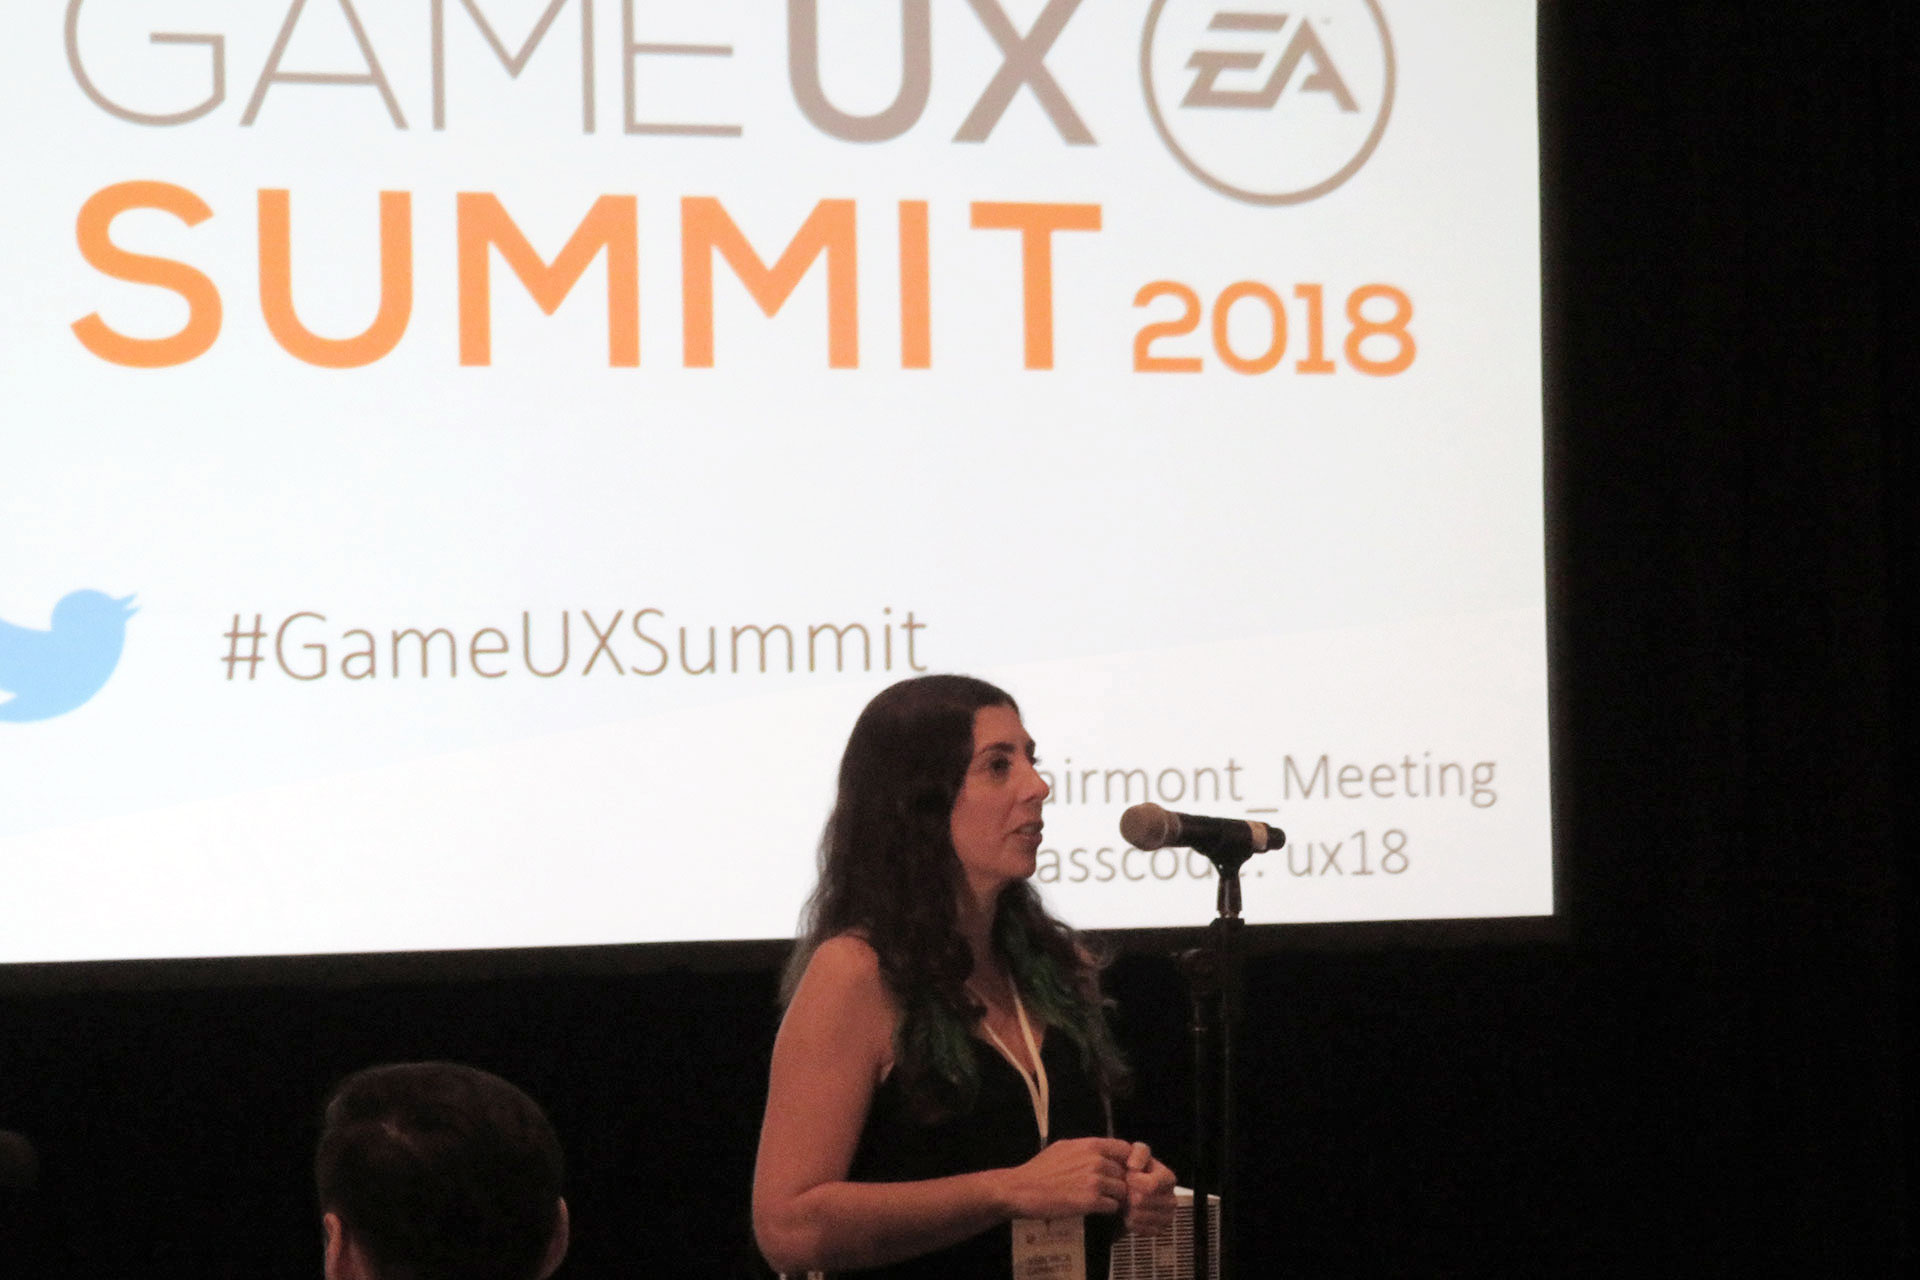 Game UX Summit 2018 (Lille, France)